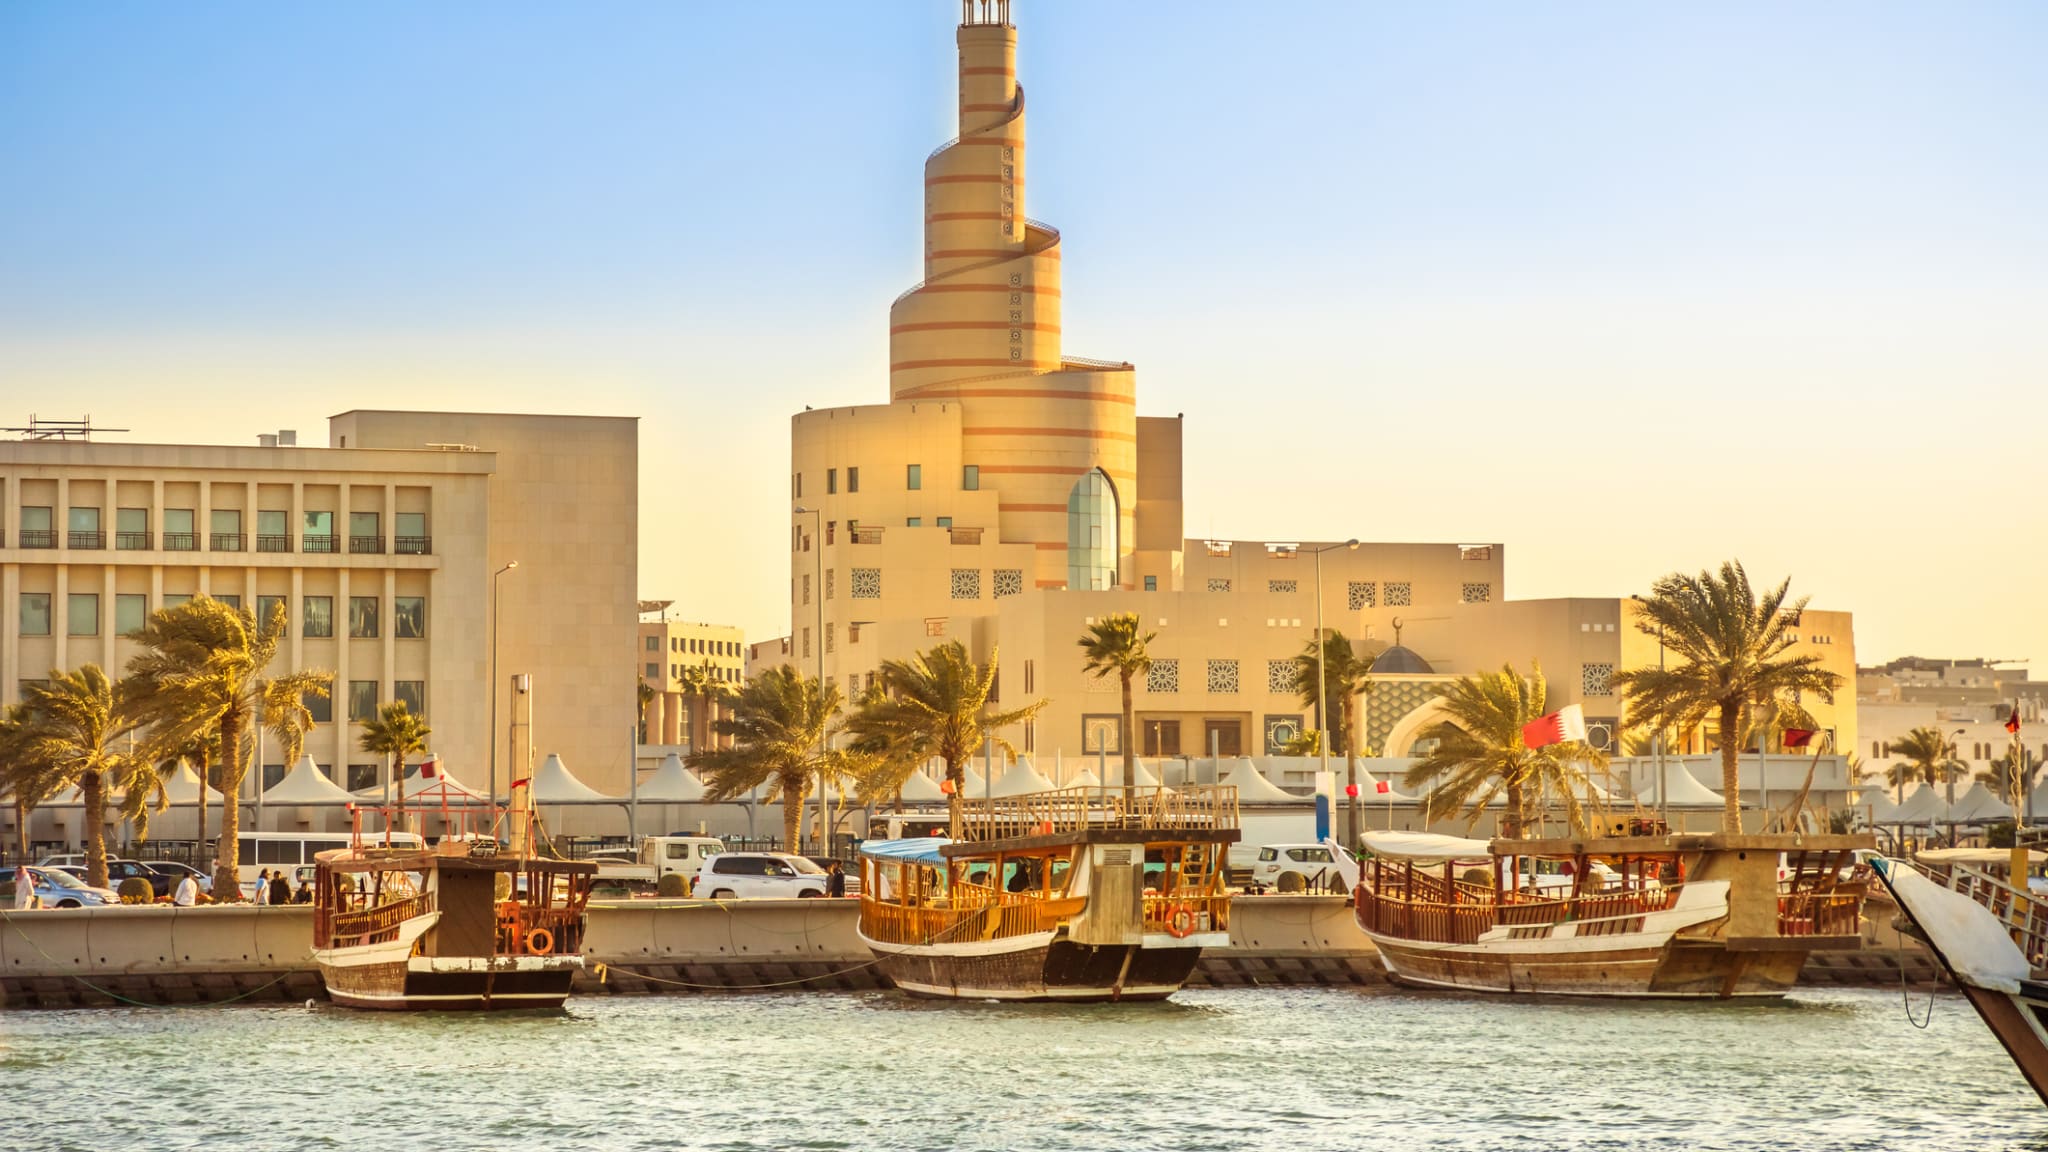 Dhow Harbor, Doha © bennymarty/iStock / Getty Images Plus via Getty Images